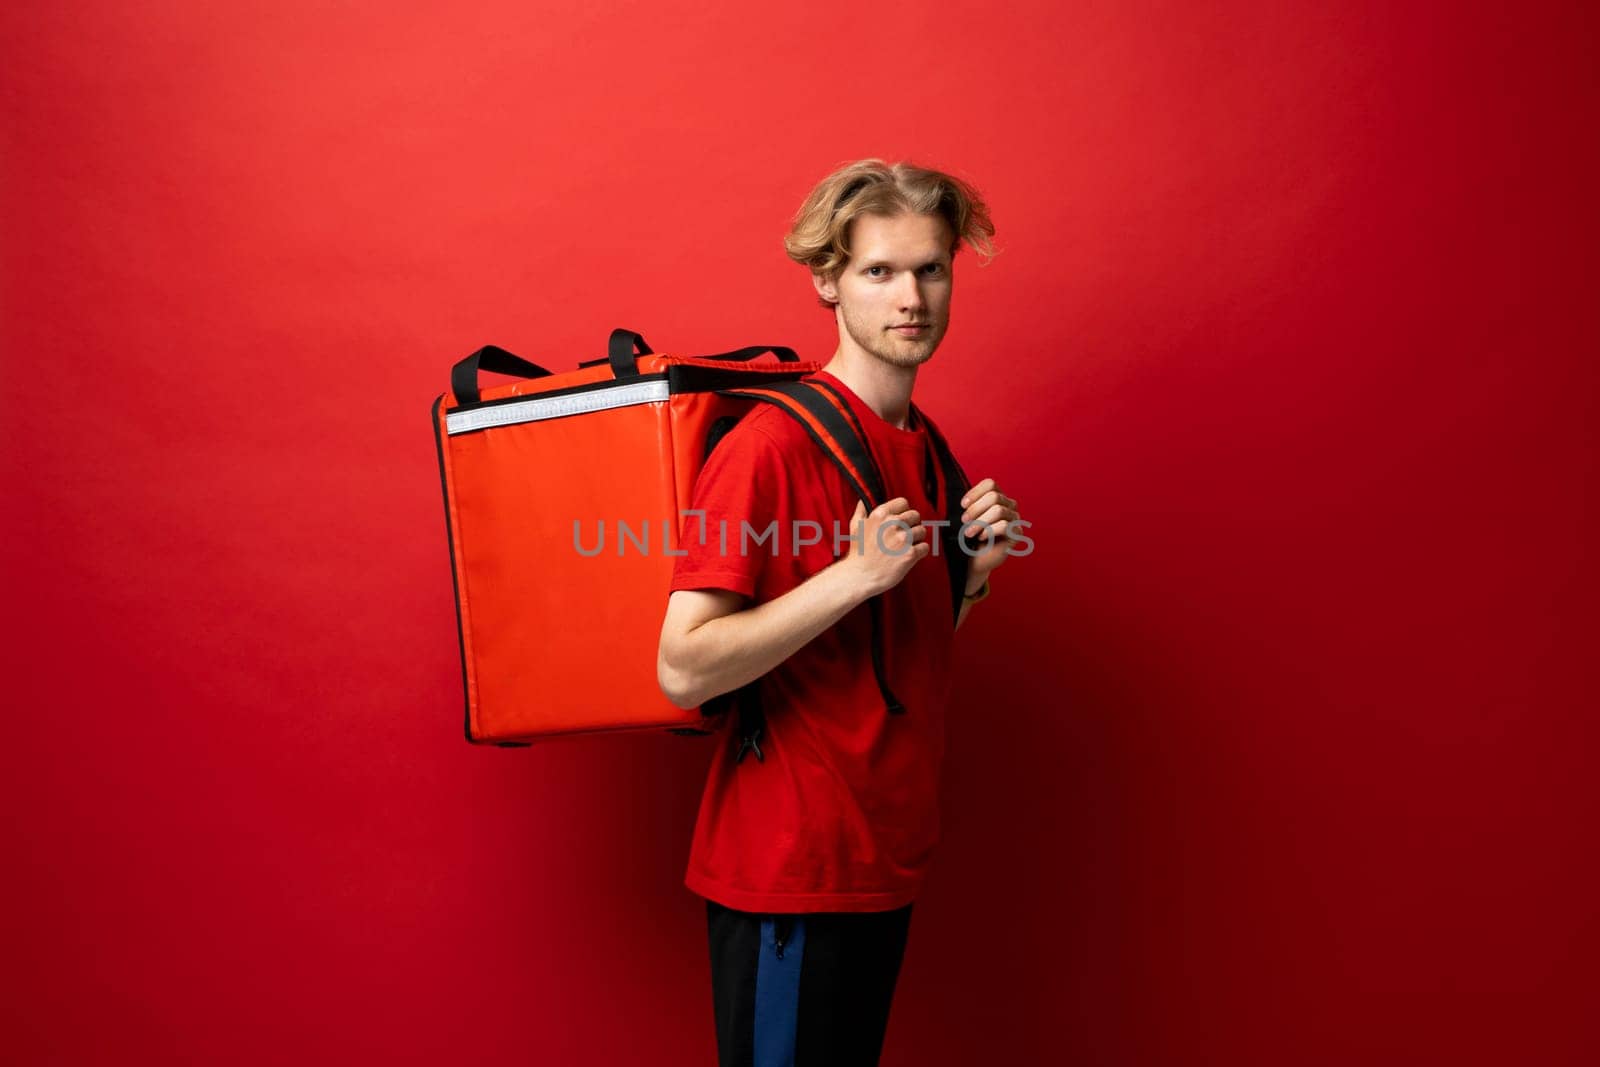 Best Delivery Service Concept. Portrait of confident smiling male courier wearing red uniform and thermo backpack bag looking at camera isolated on red background